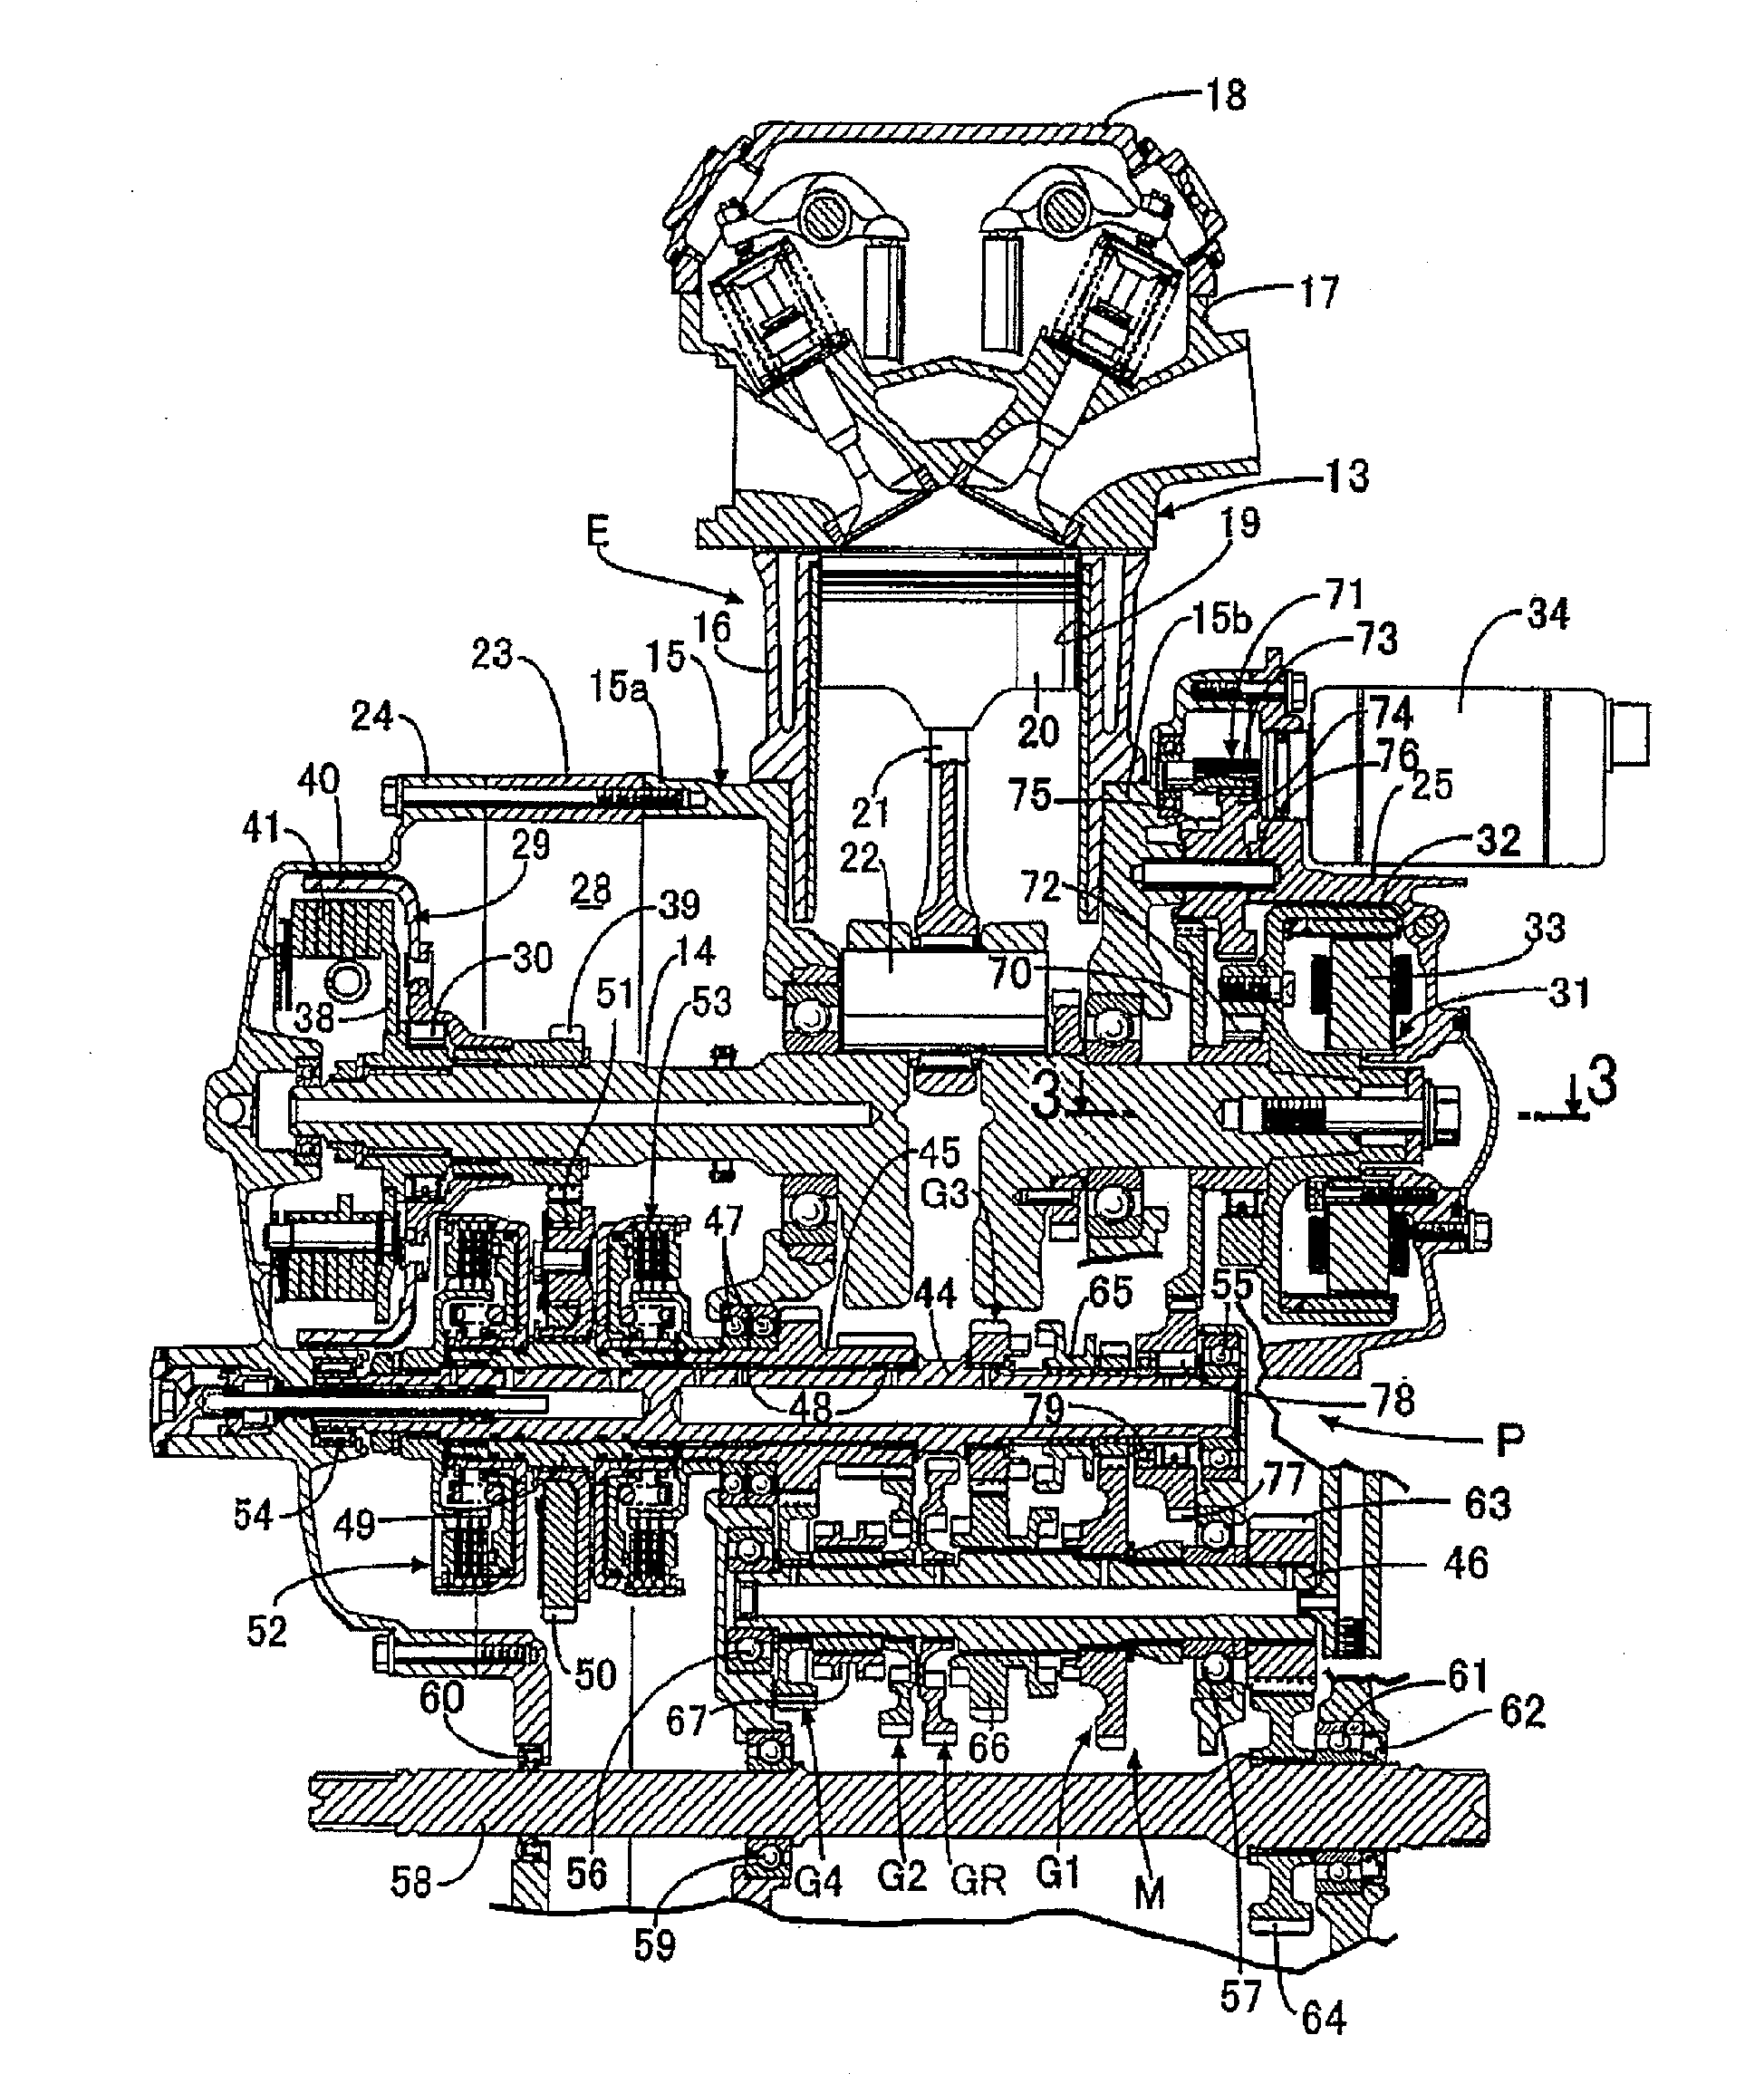 Lubrication structure for hybrid type vehicle power unit